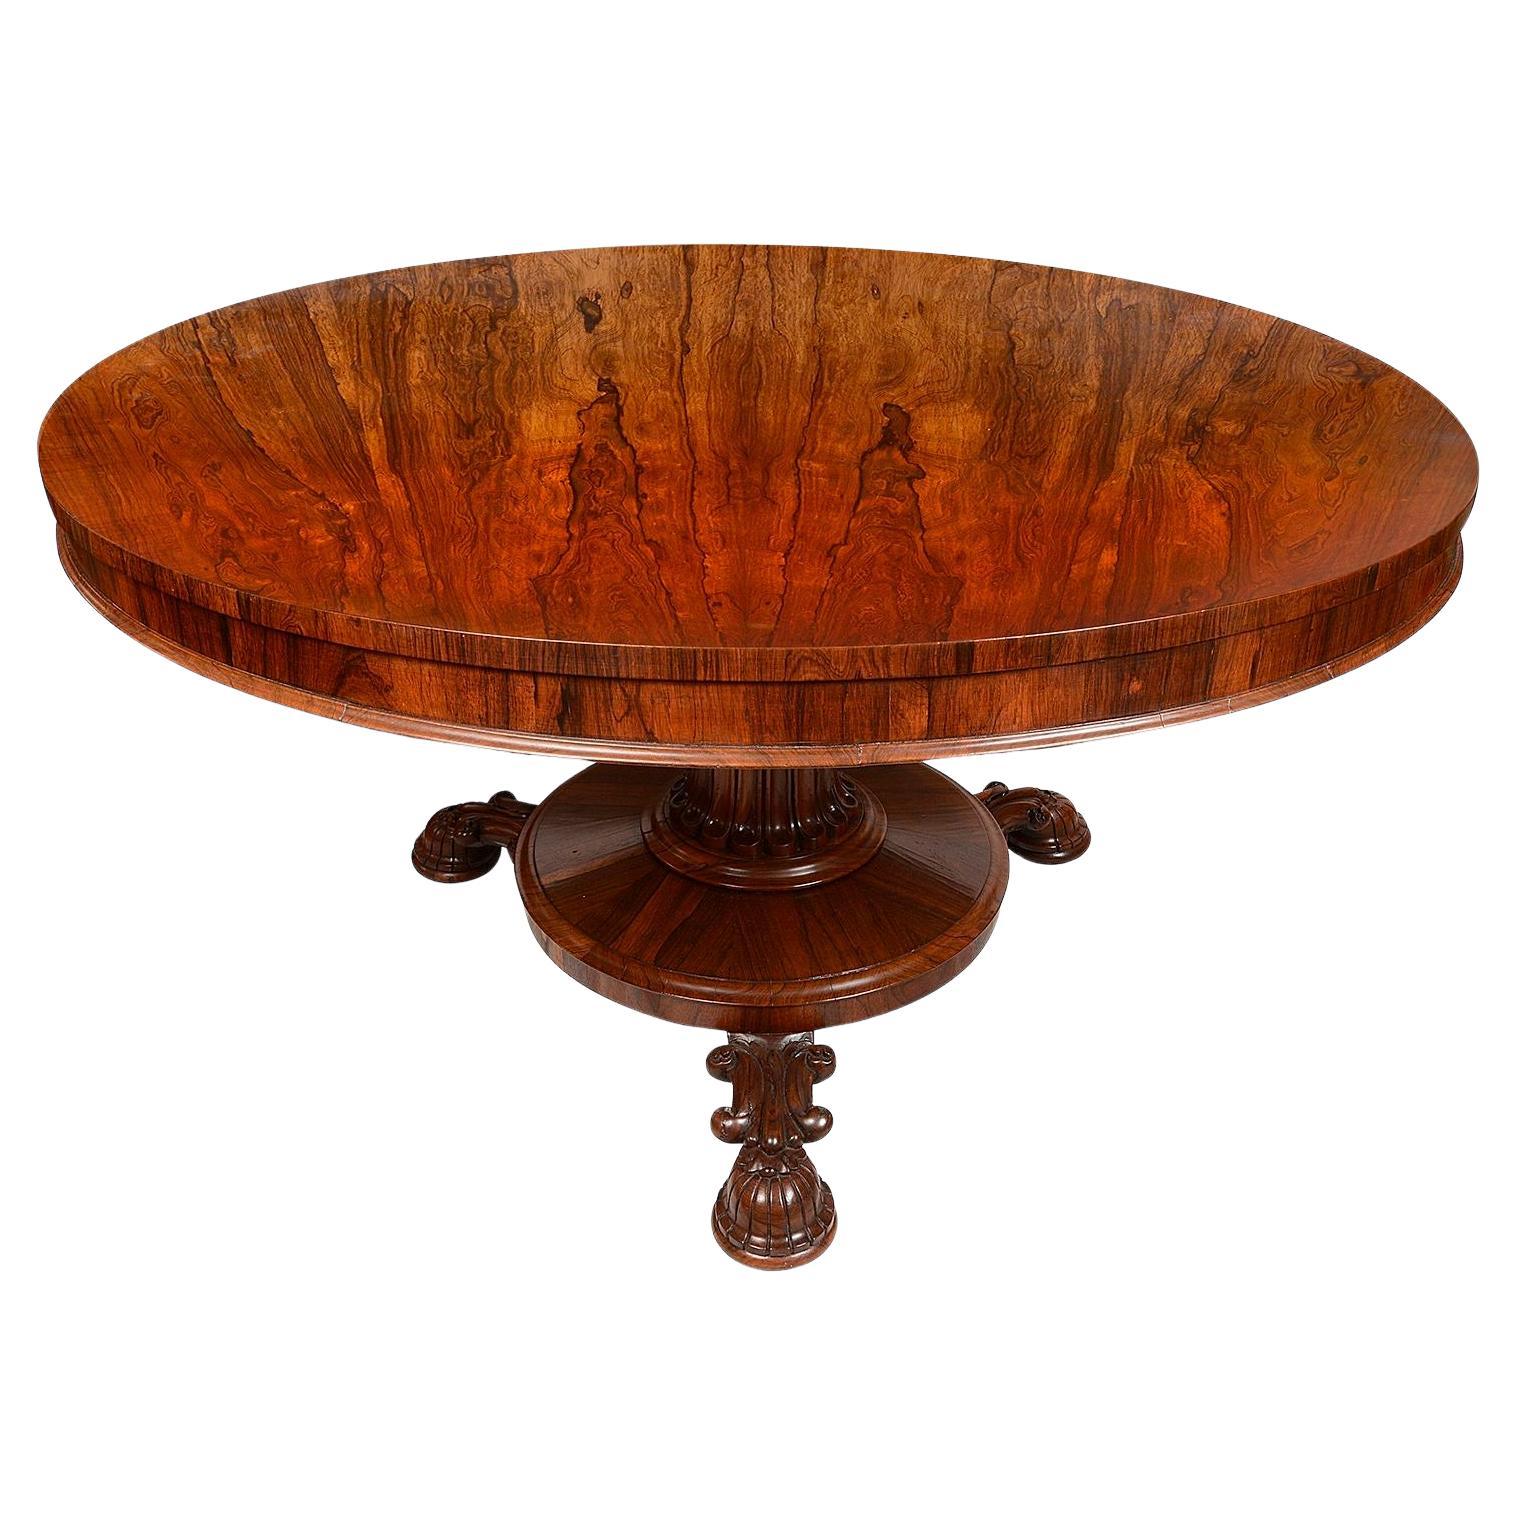 Late Regency Period Rosewood Dining / Centre Table, circa 1820-1840 For Sale